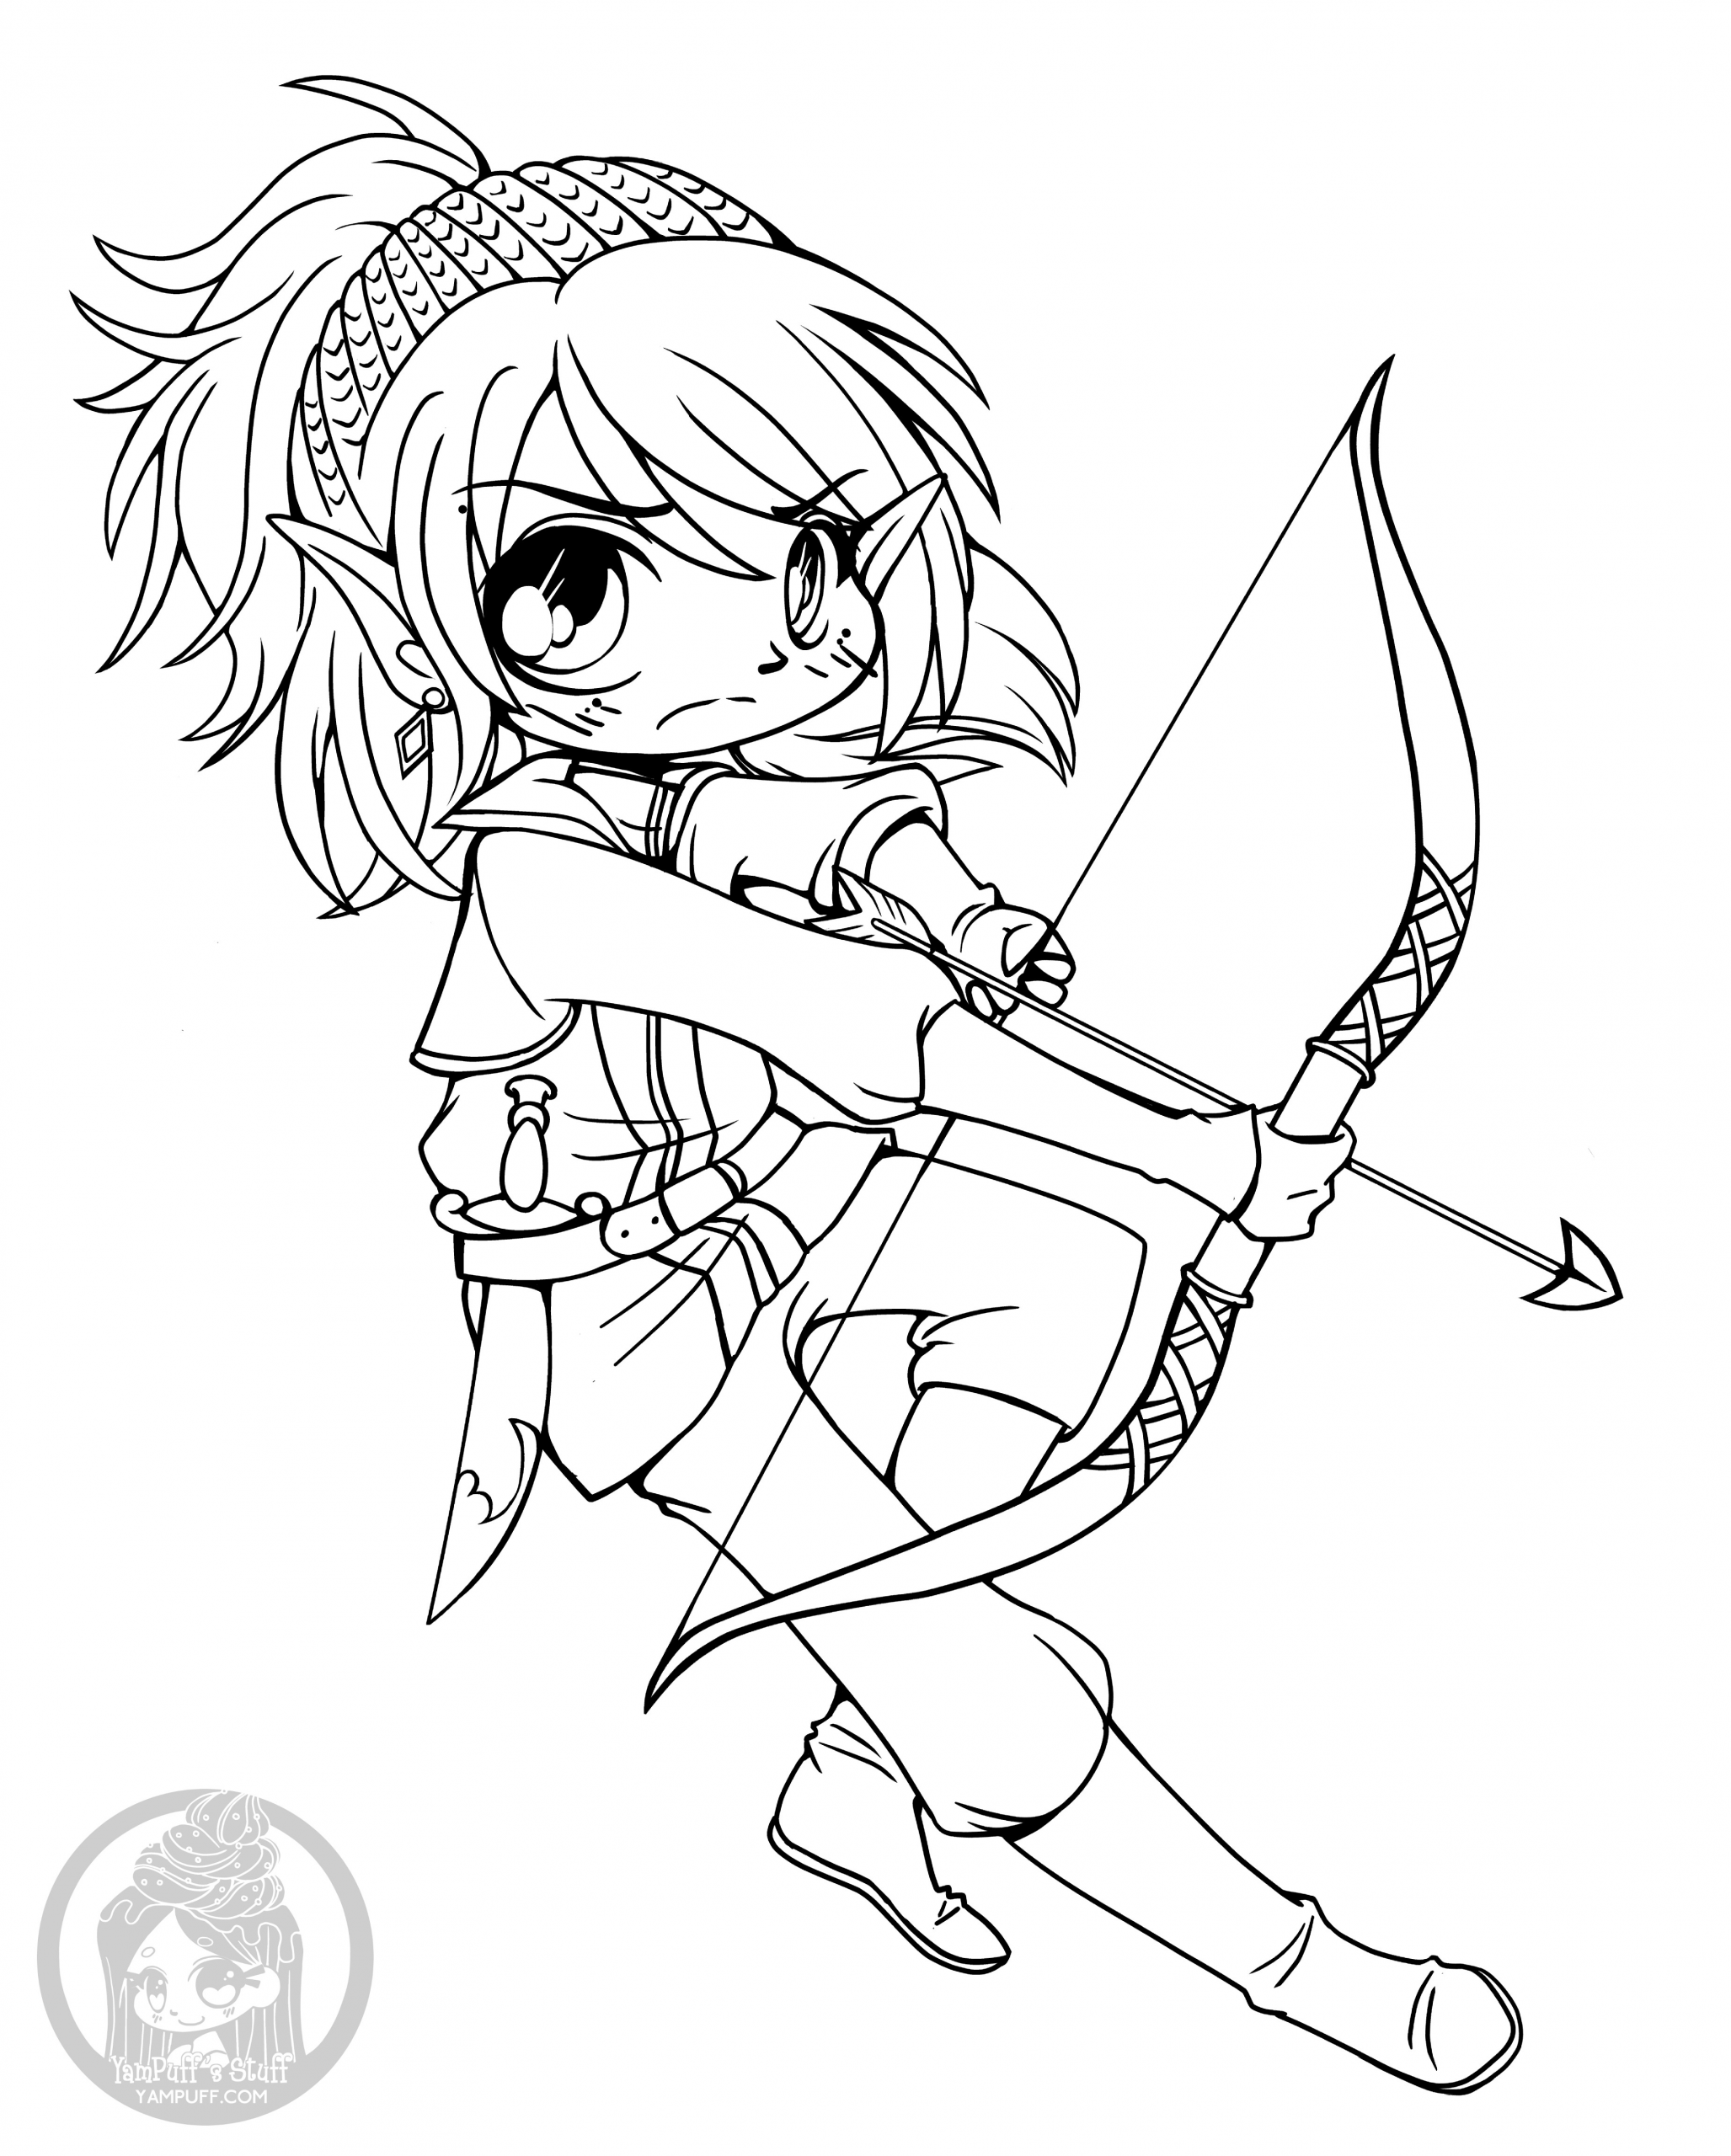 Chibi Girls Coloring Pages
 Fanart Free Chibi Colouring Pages • YamPuff s Stuff